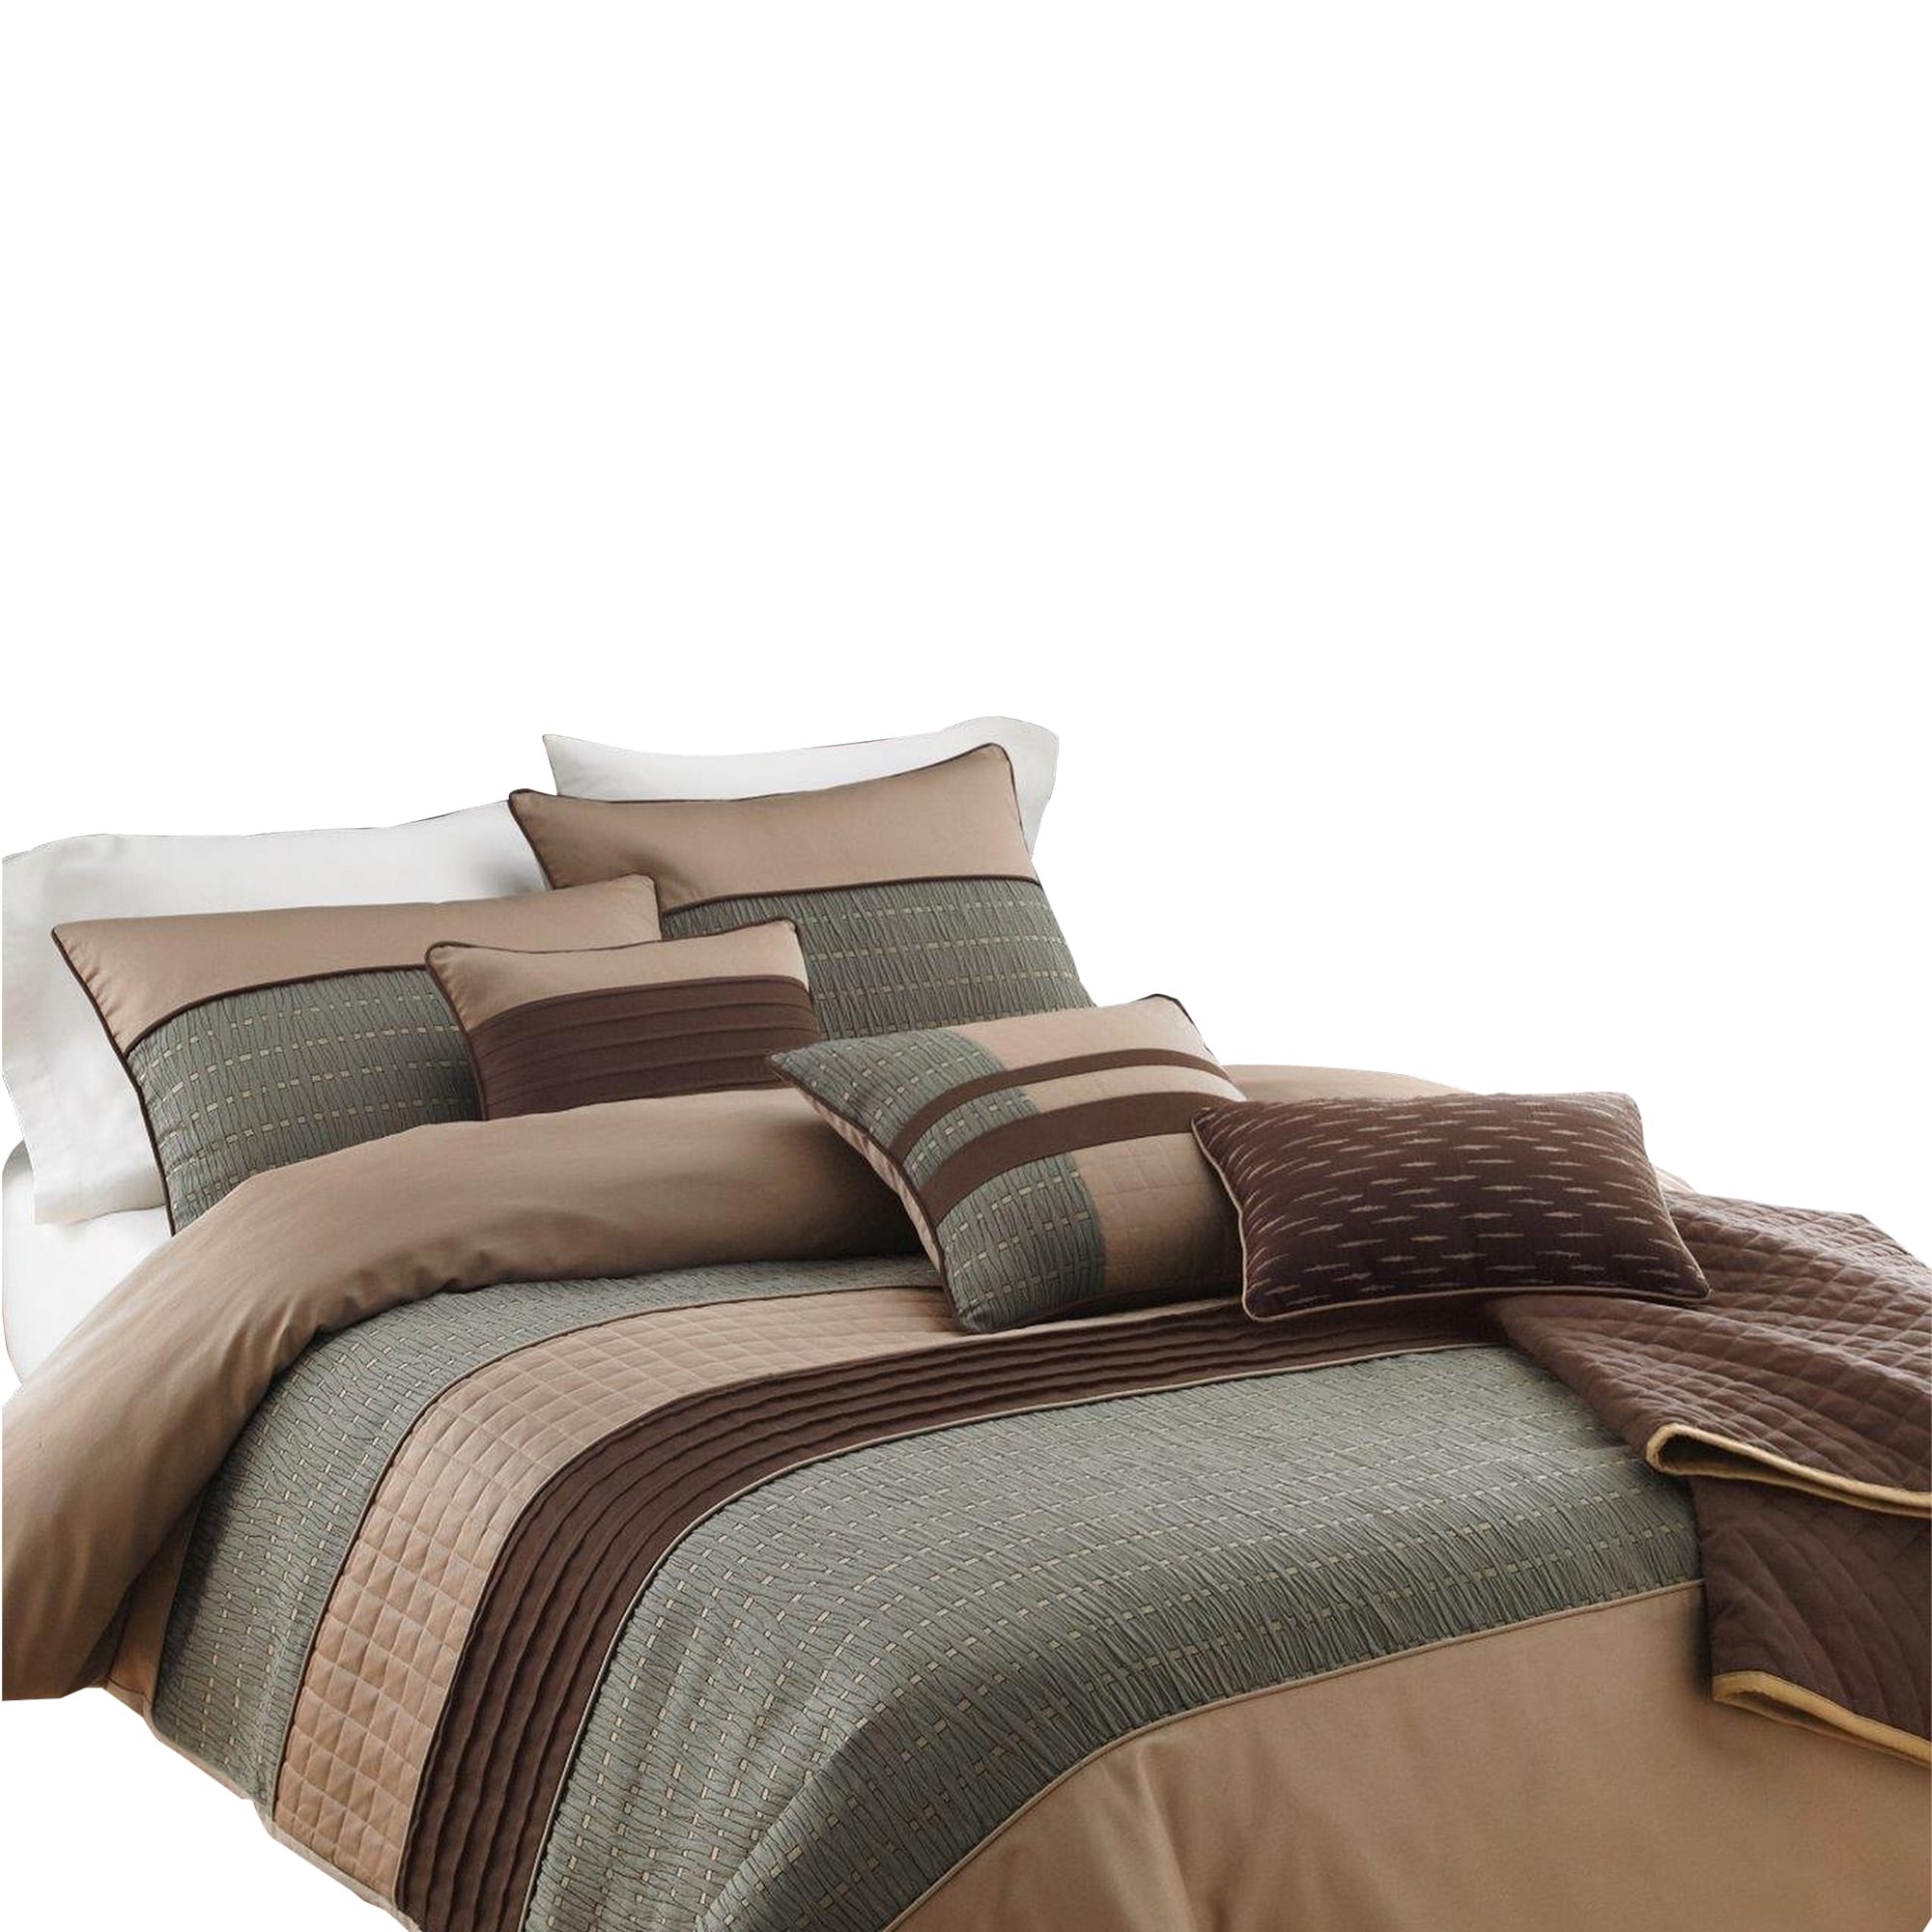 Shop For 7 Piece Queen Comforter Set With Pleats And Texture Gray And Brown Get Free Delivery On Everything At Overstock Your Online Fashion Bedding Store Get 5 In Rewards With Club O 32006696